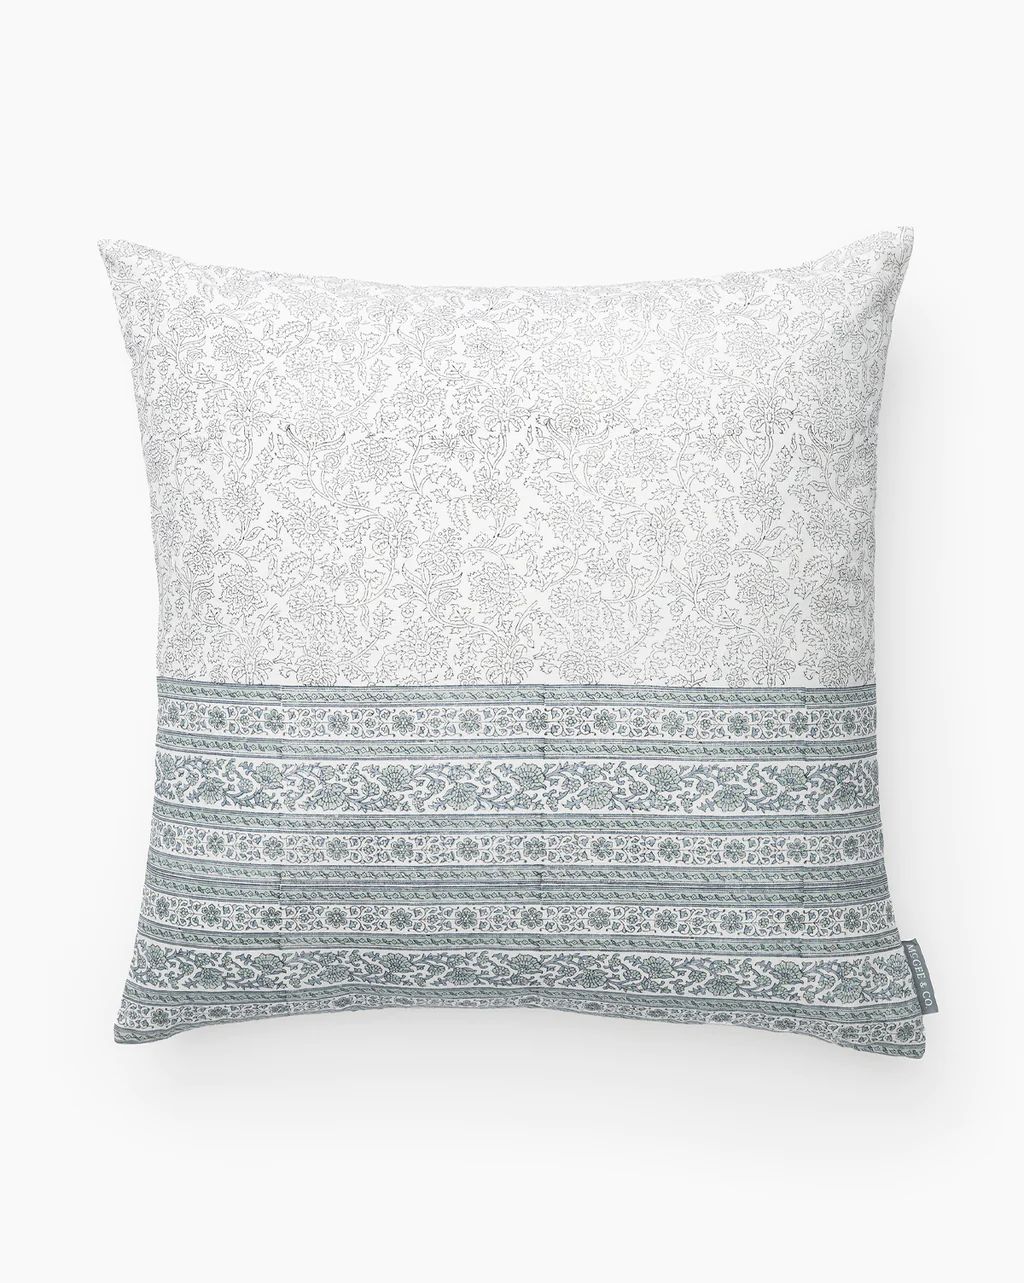 Jeanne Pillow Cover | McGee & Co.